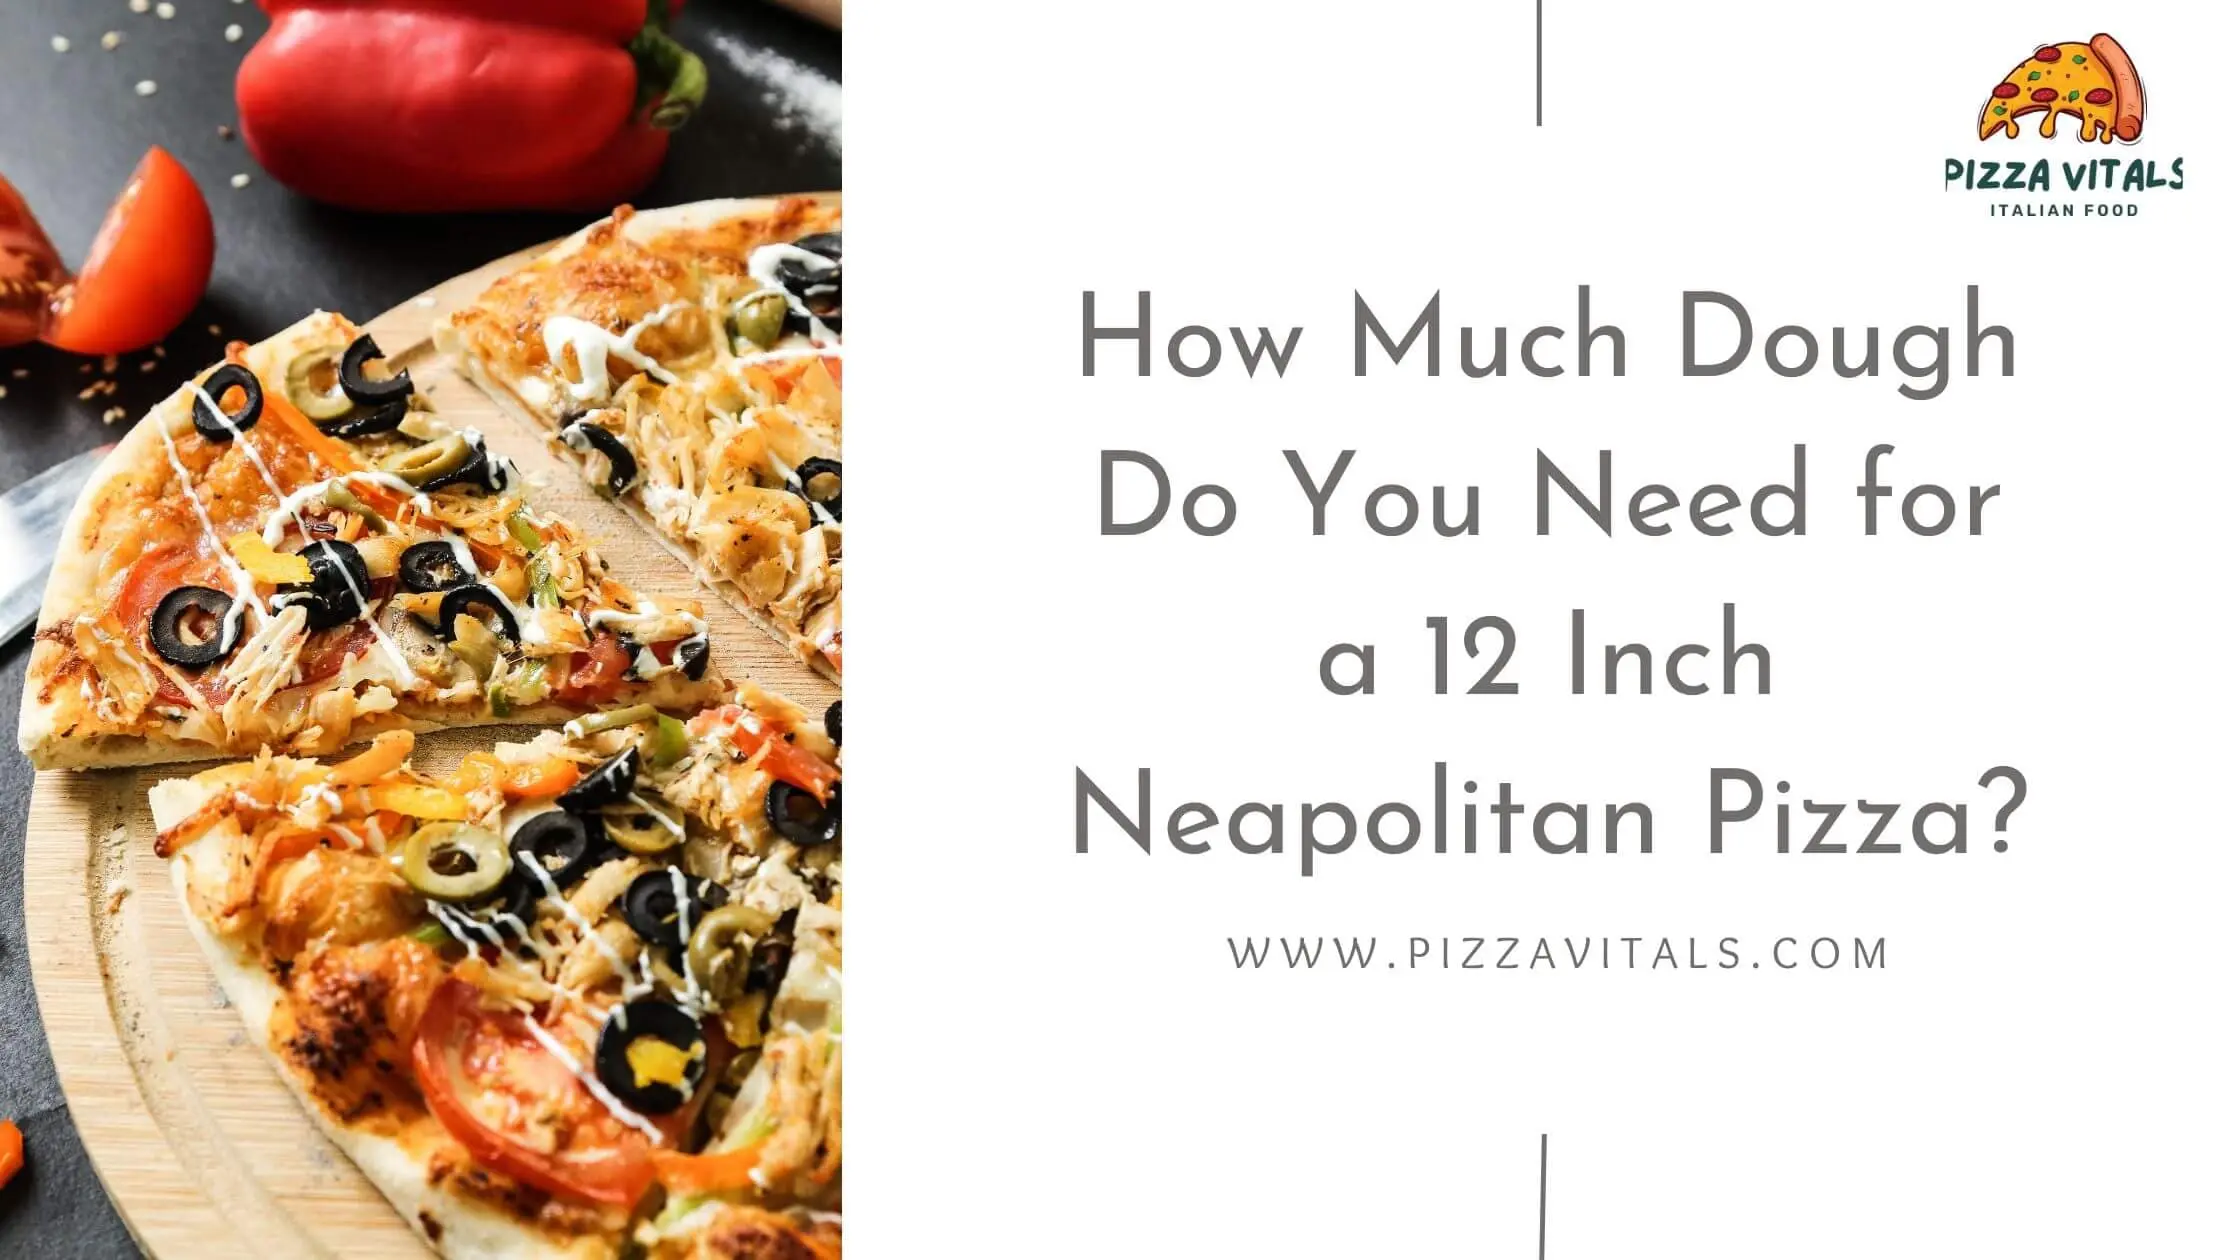 Making the Perfect Pizza: How Much Dough Do You Need for a 12 Inch Neapolitan Pizza?